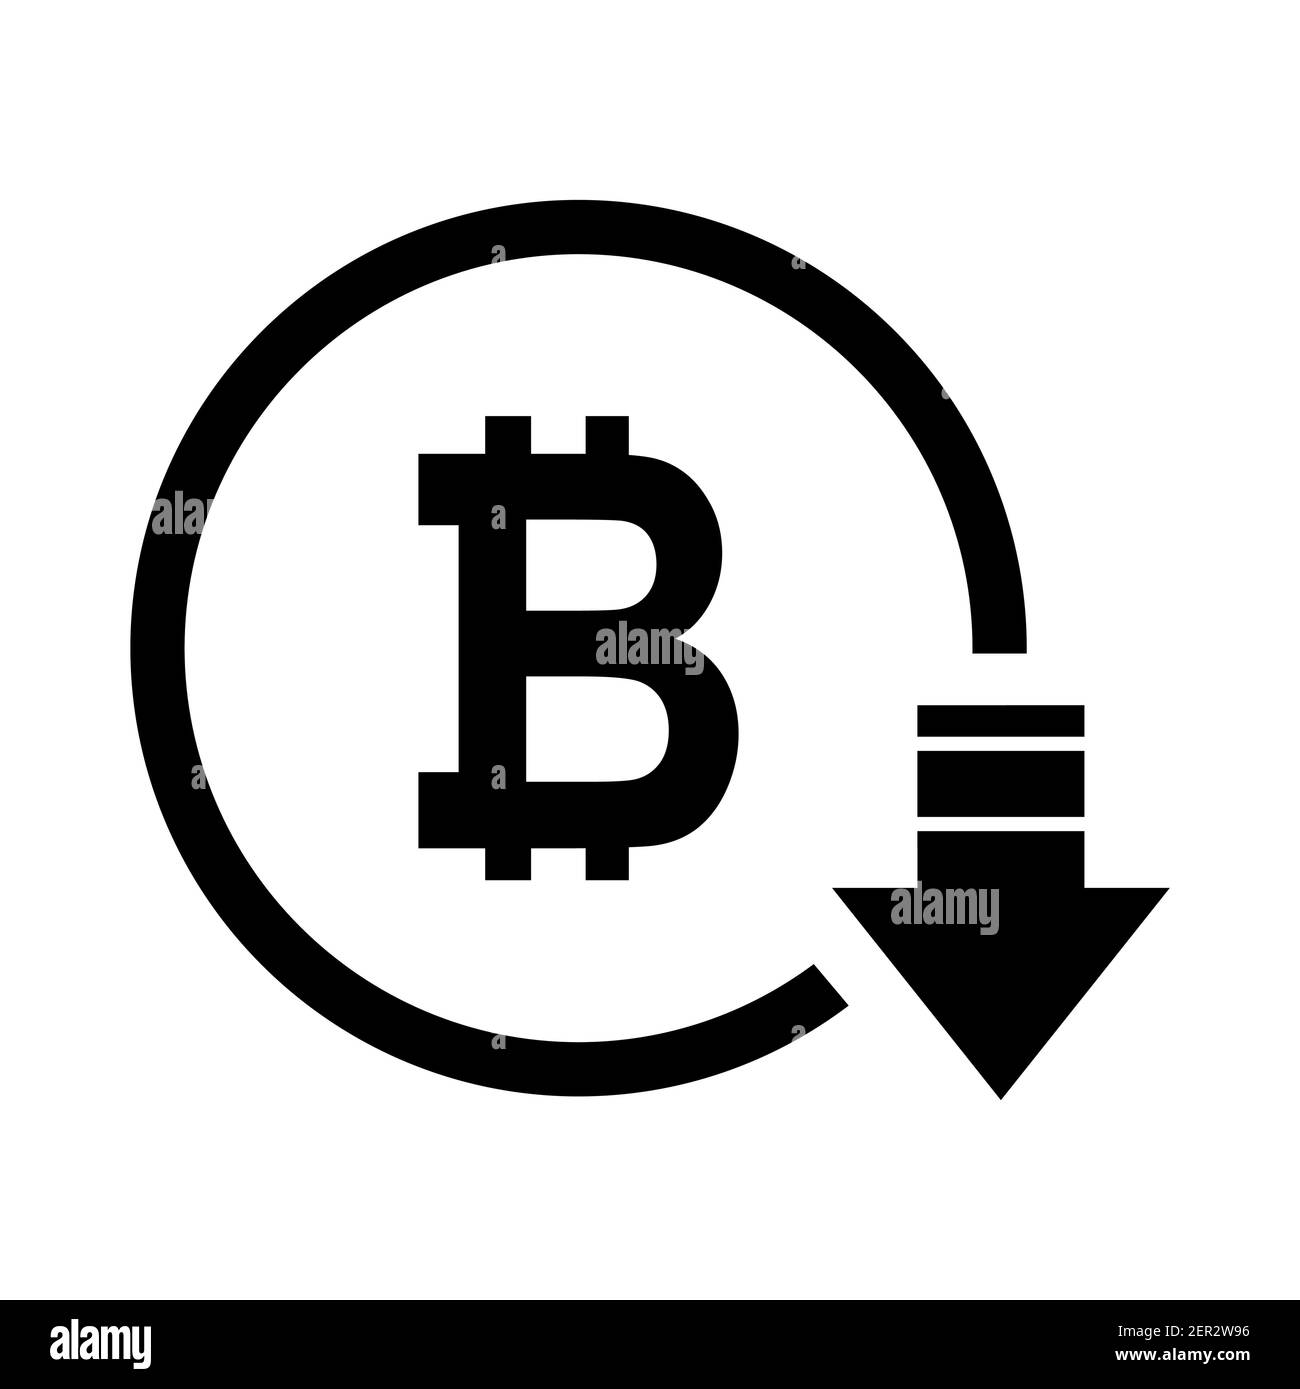 Bitcoin reduction symbol, cost decrease icon. Reduce debt bussiness sign vector illustration . Stock Vector